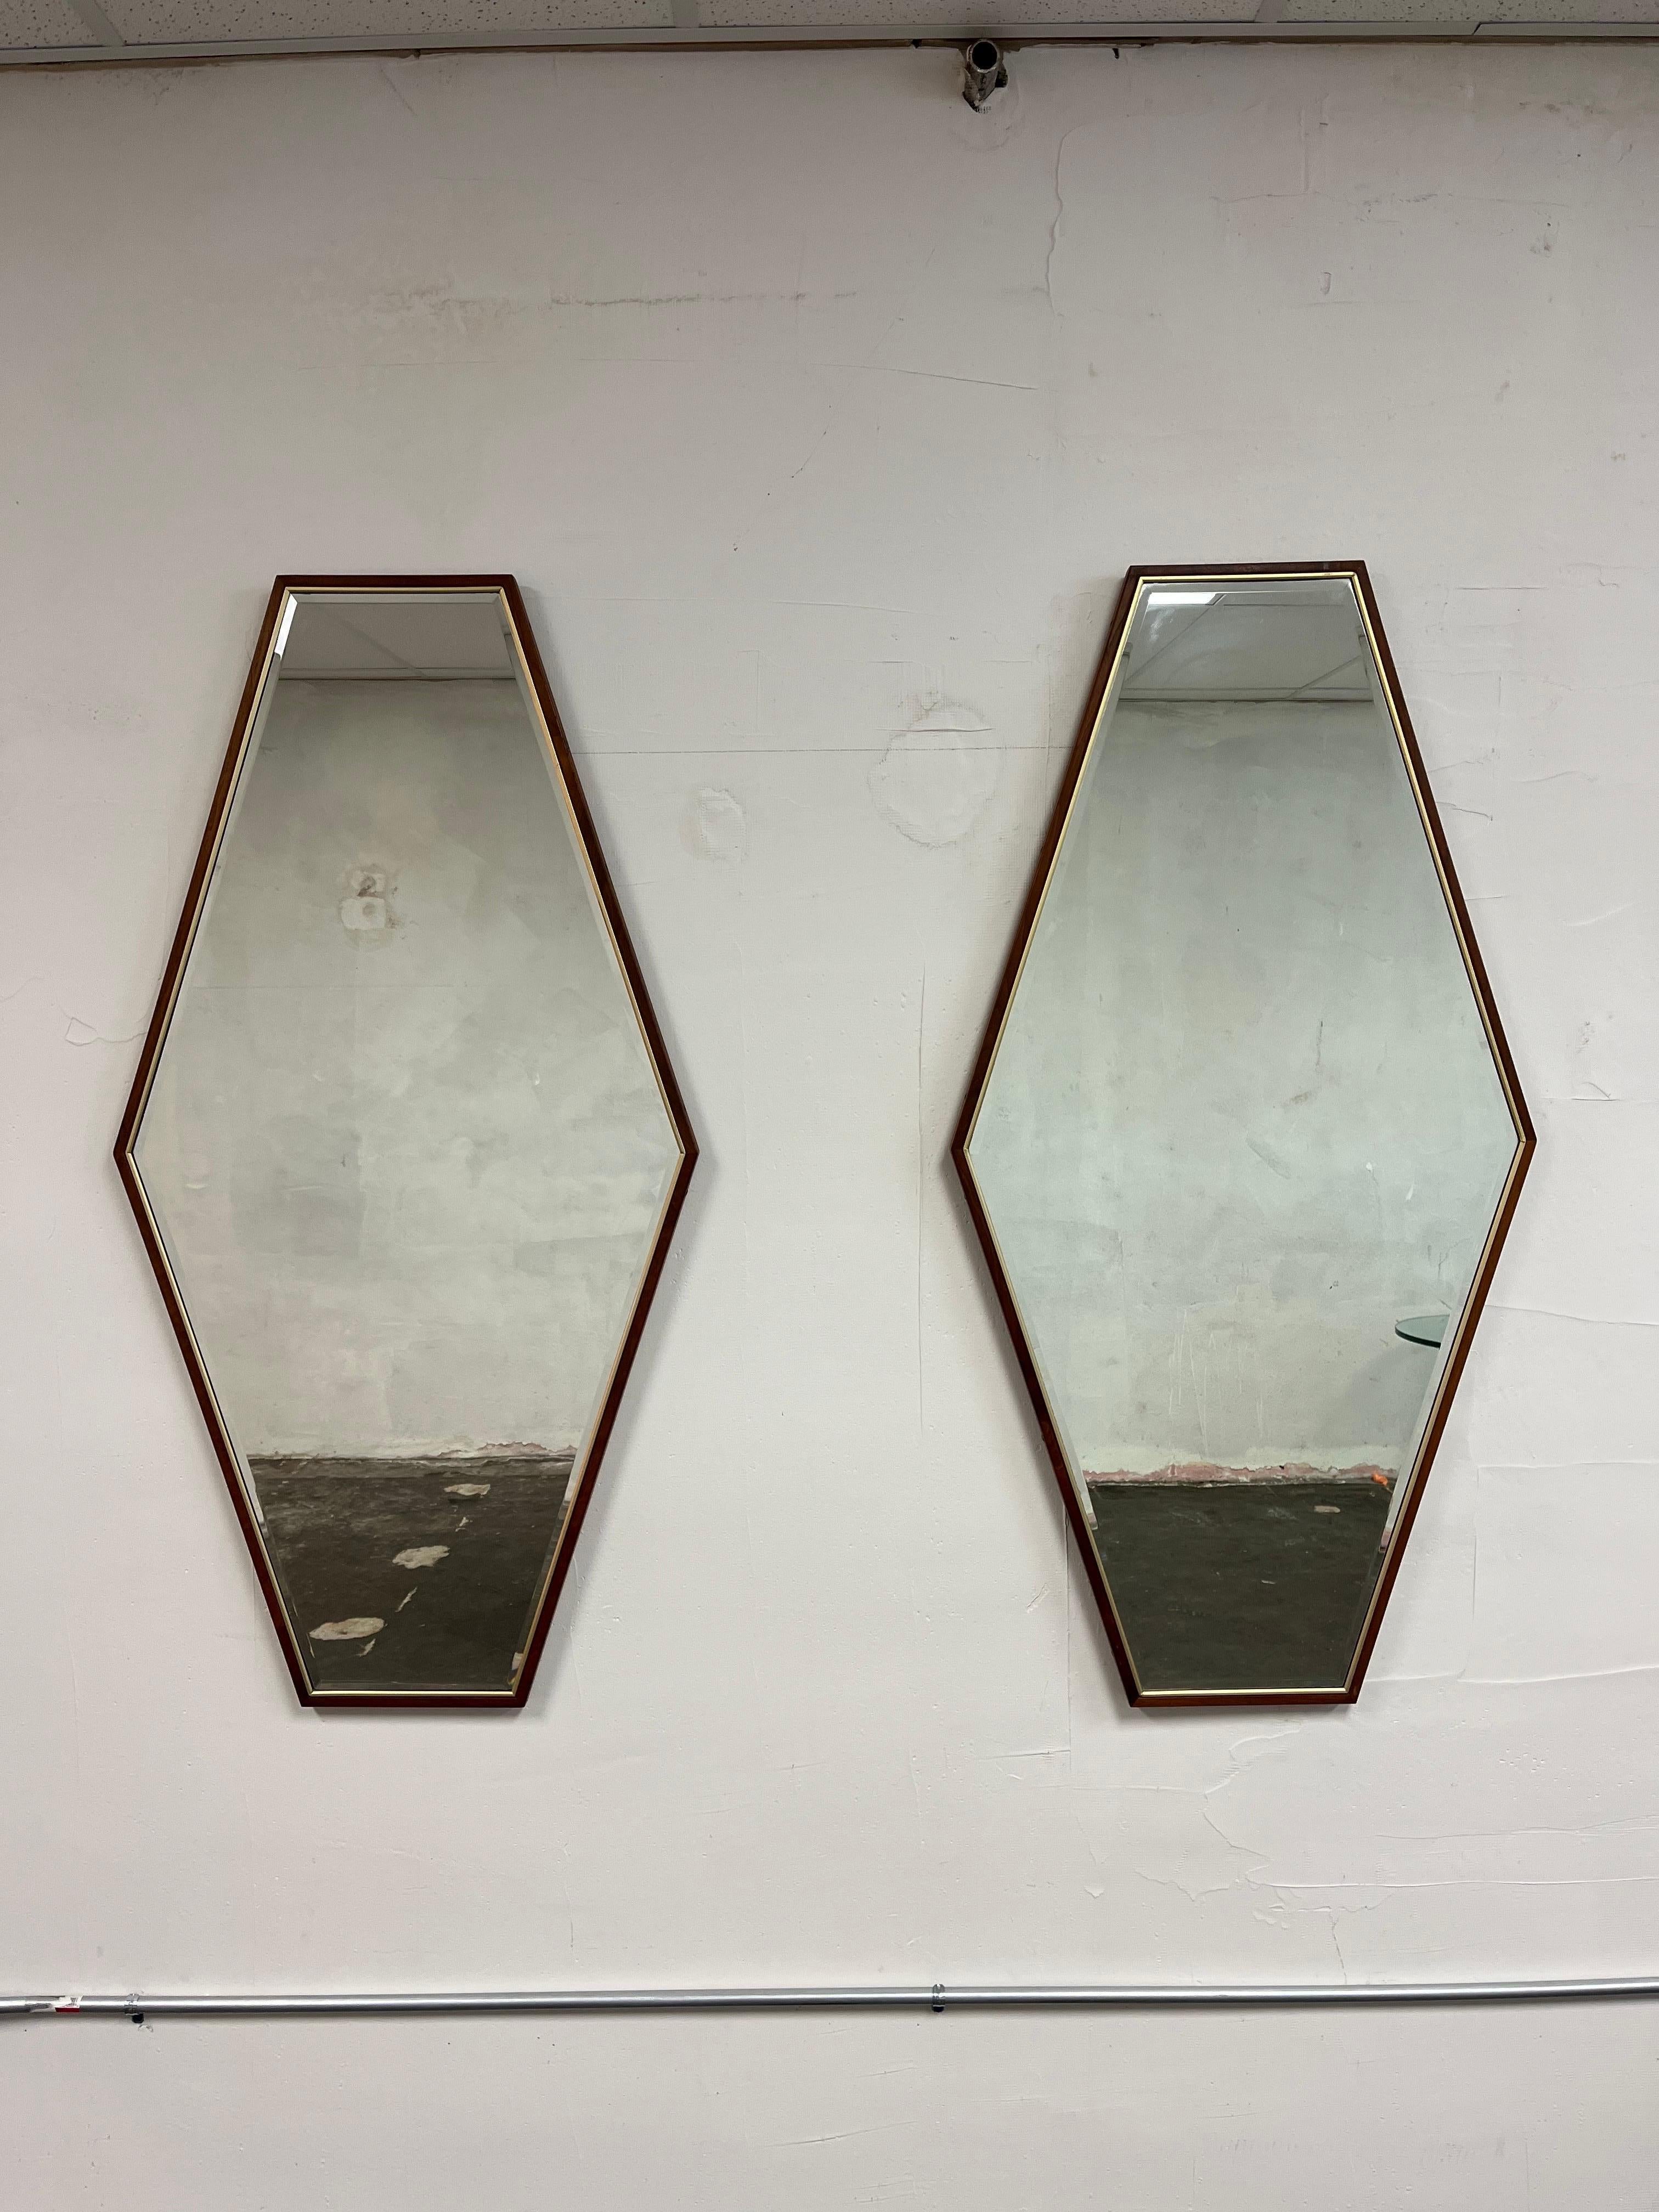 Quality vintage solid walnut frame wall mirrors. Features an inset brass border, hexagon solid wood frame, and beveled glass mirror. The construction is very nice and the design is similar to the works of Paul McCobb. Would look great hanging